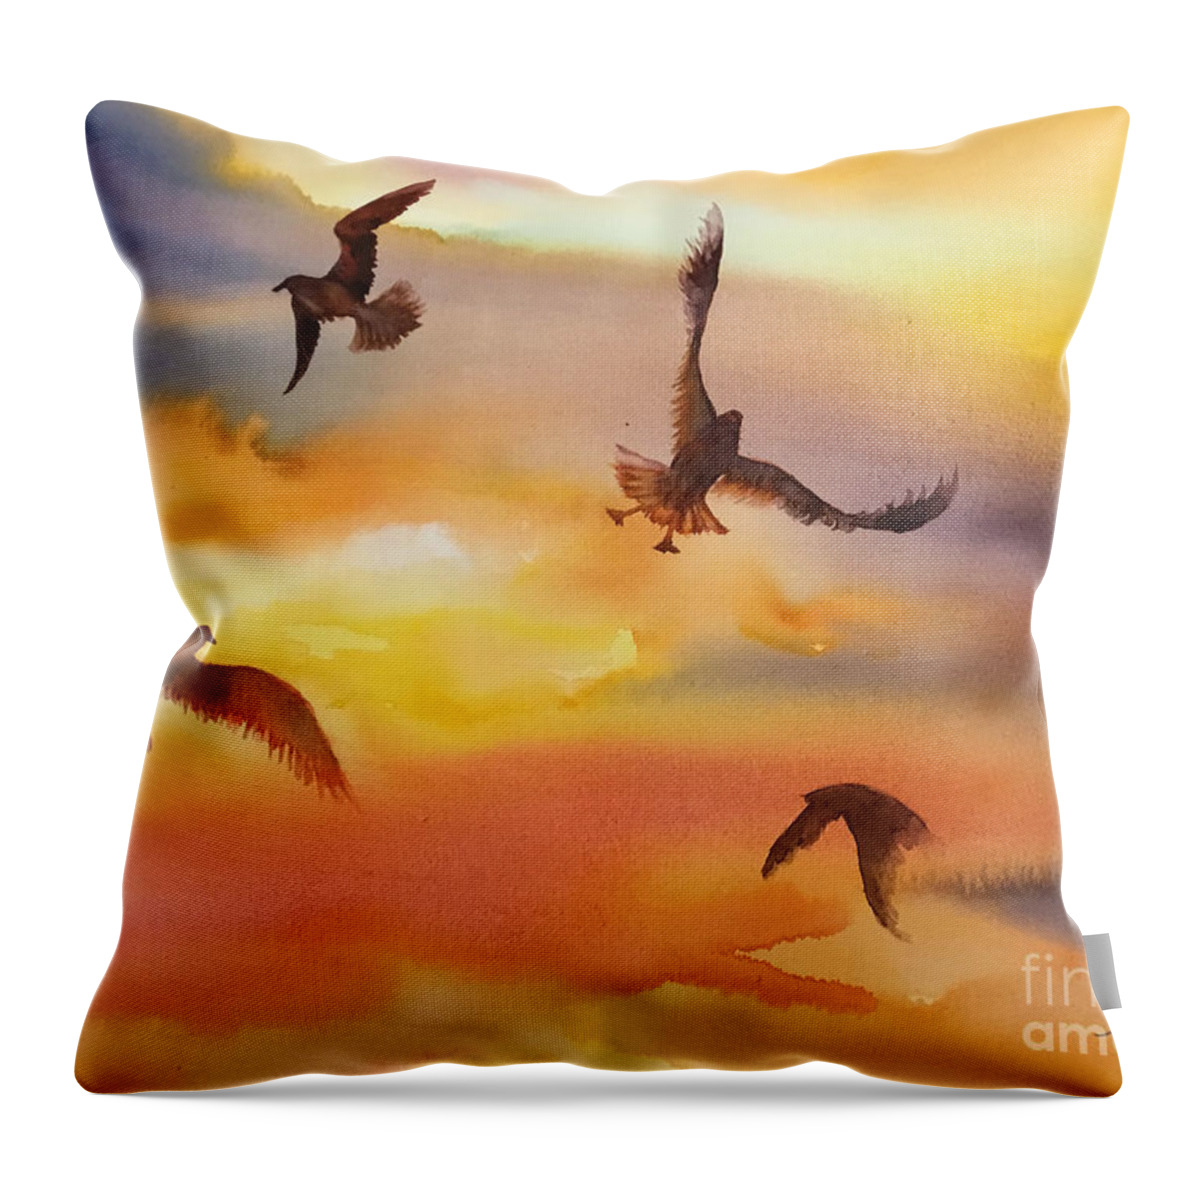 1122021 Throw Pillow featuring the painting 1122021 by Han in Huang wong